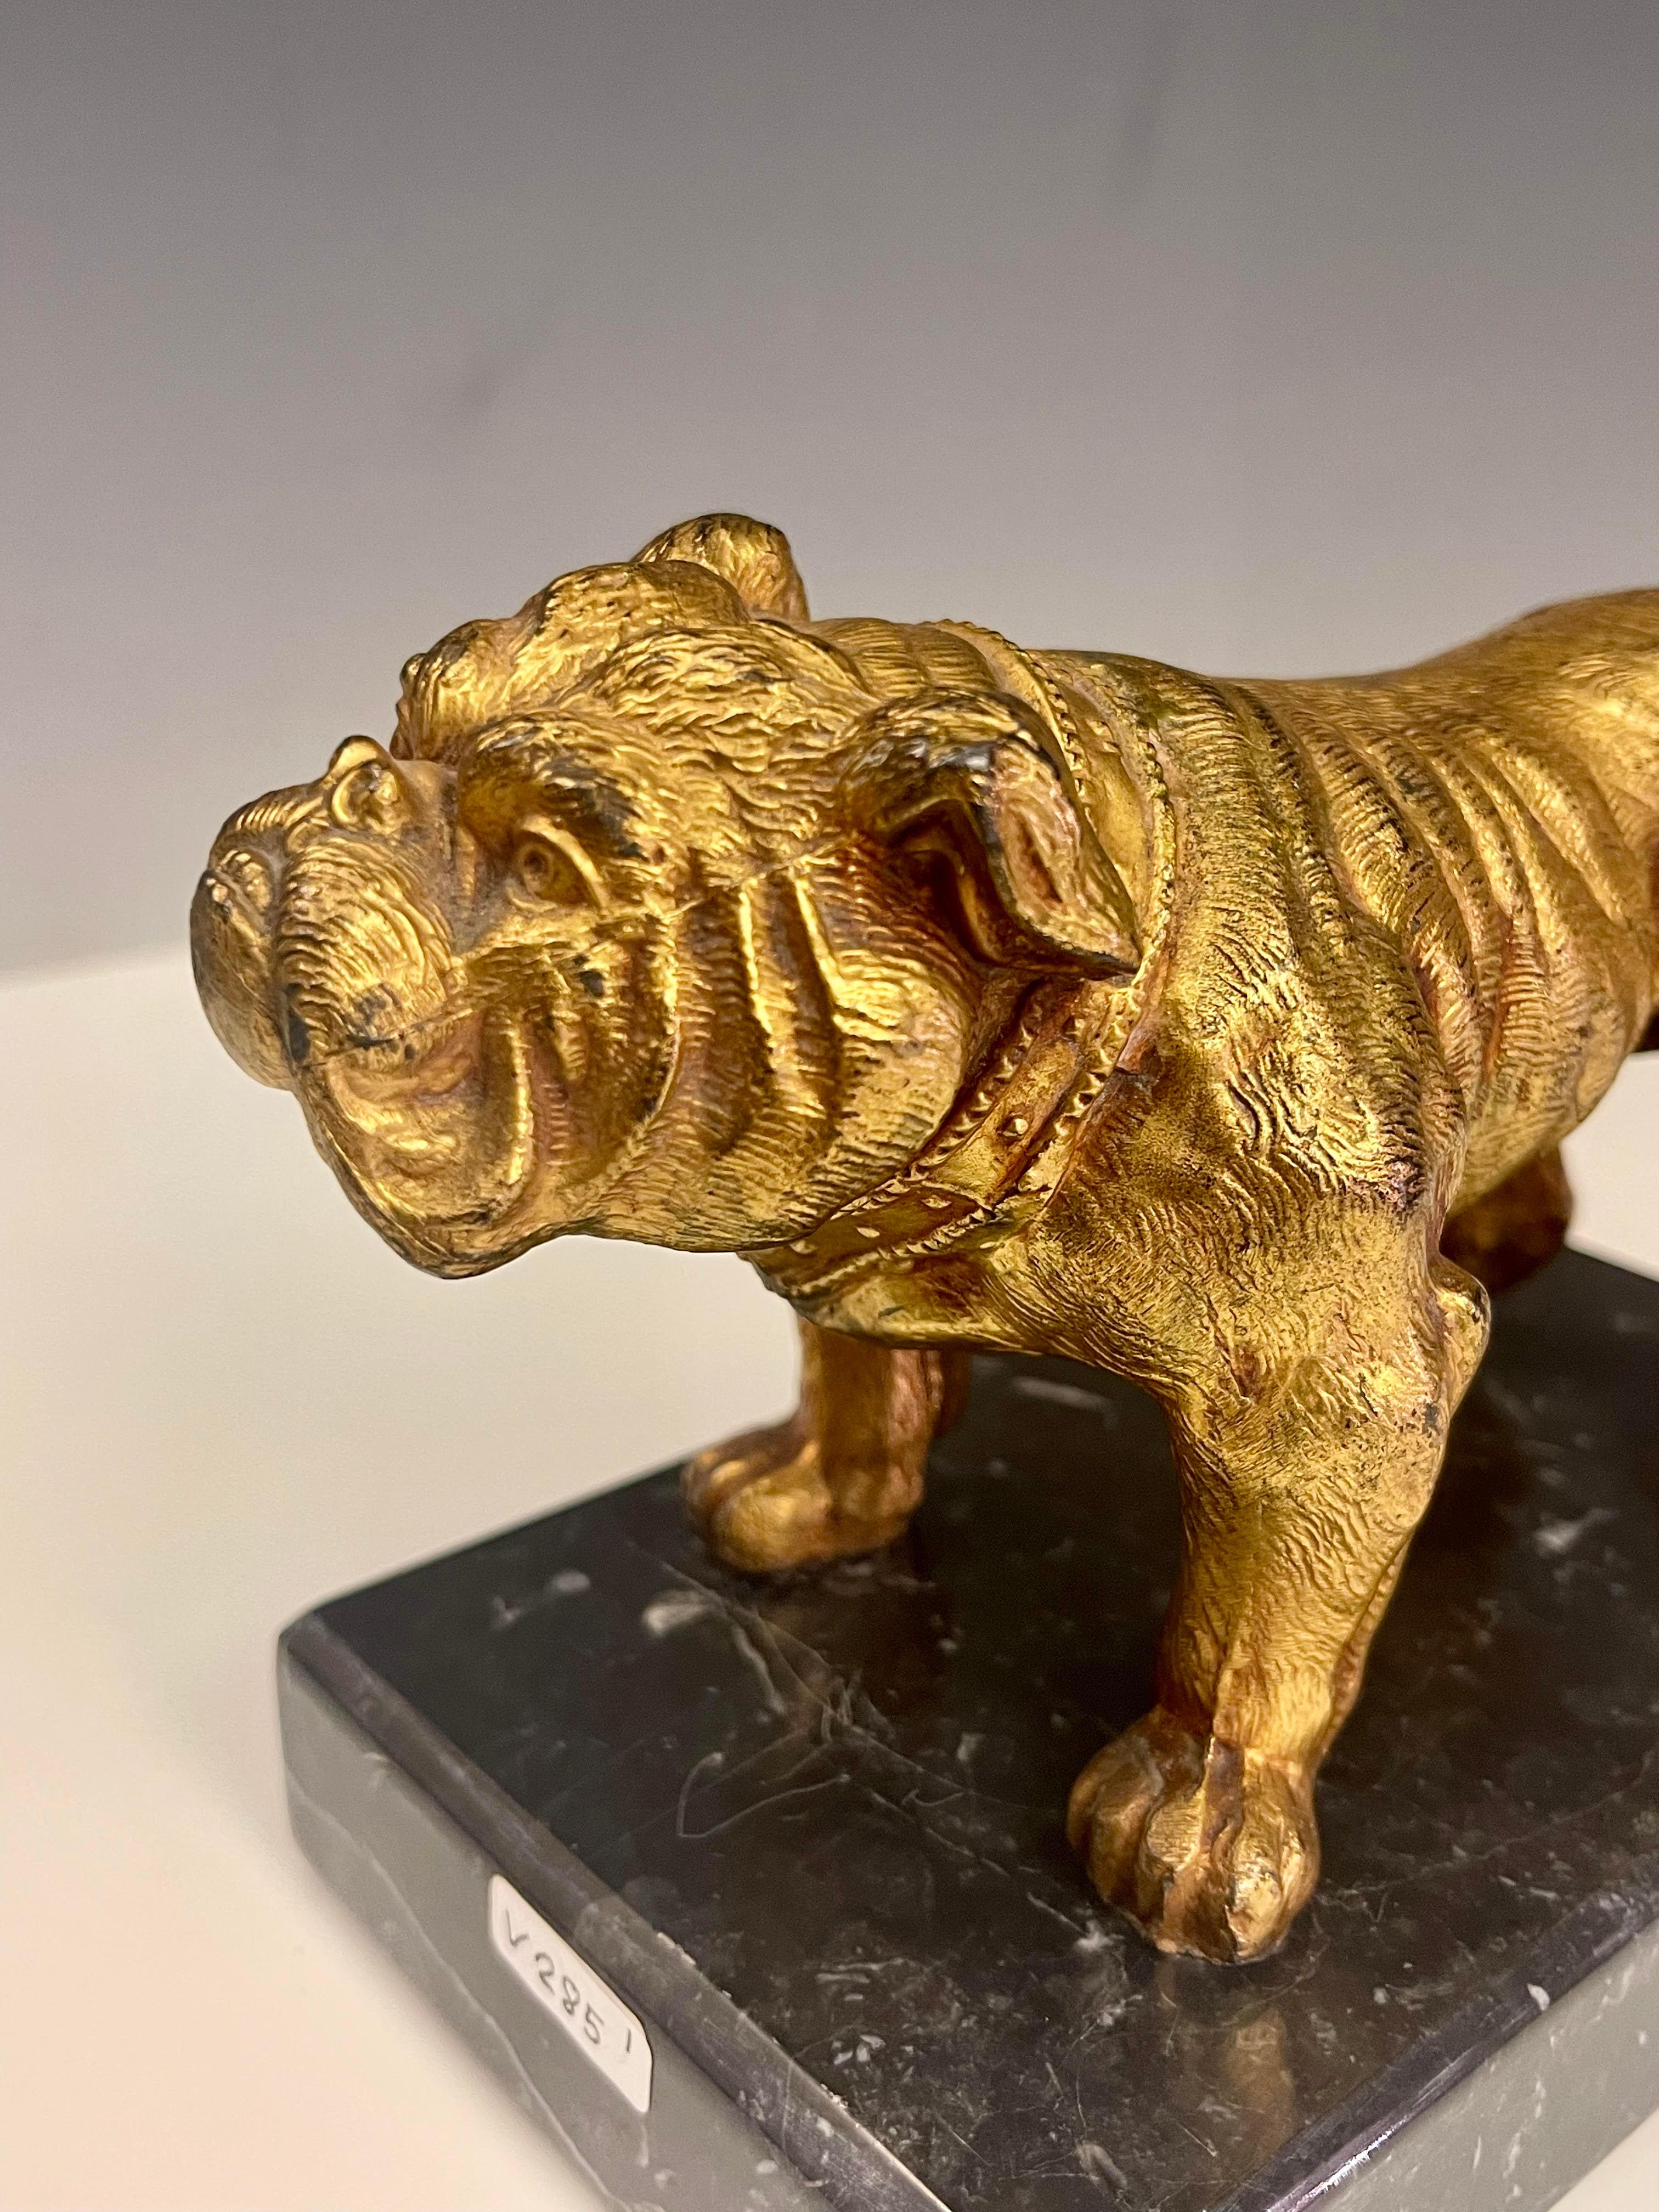 Metal Bulldog dog sculpture signed J.B. Made in America late 19th century.  For Sale